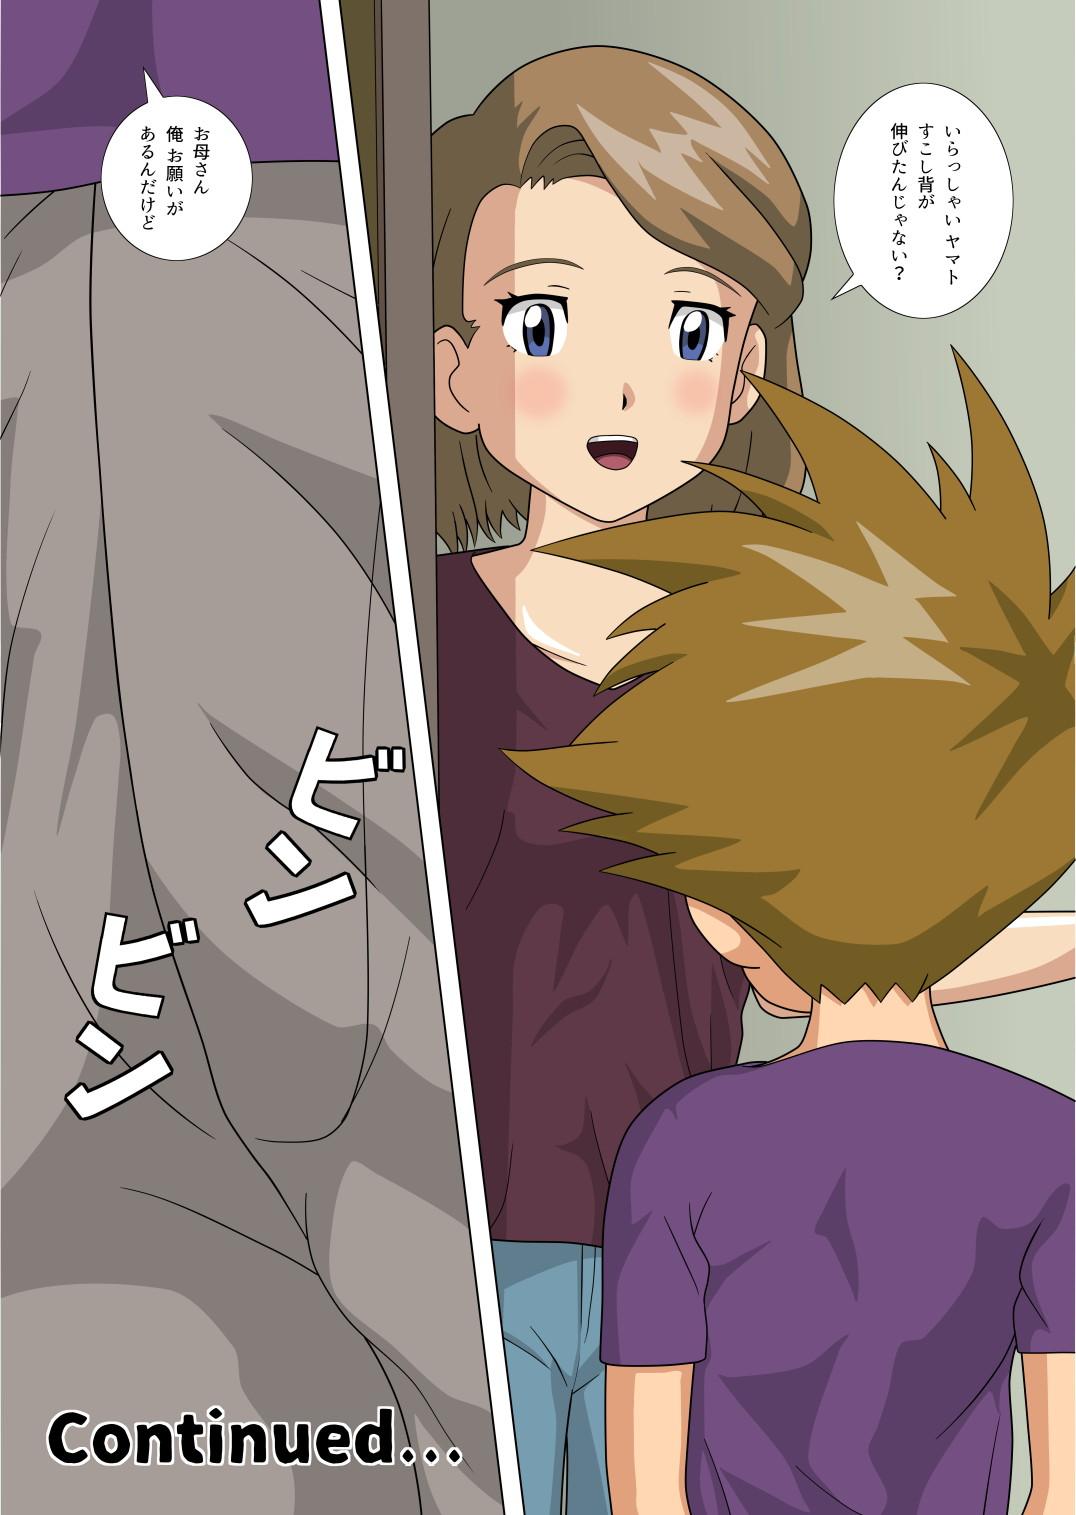 Bra Friend's mother teaches me how to sex. - Digimon adventure Digimon Beautiful - Page 18